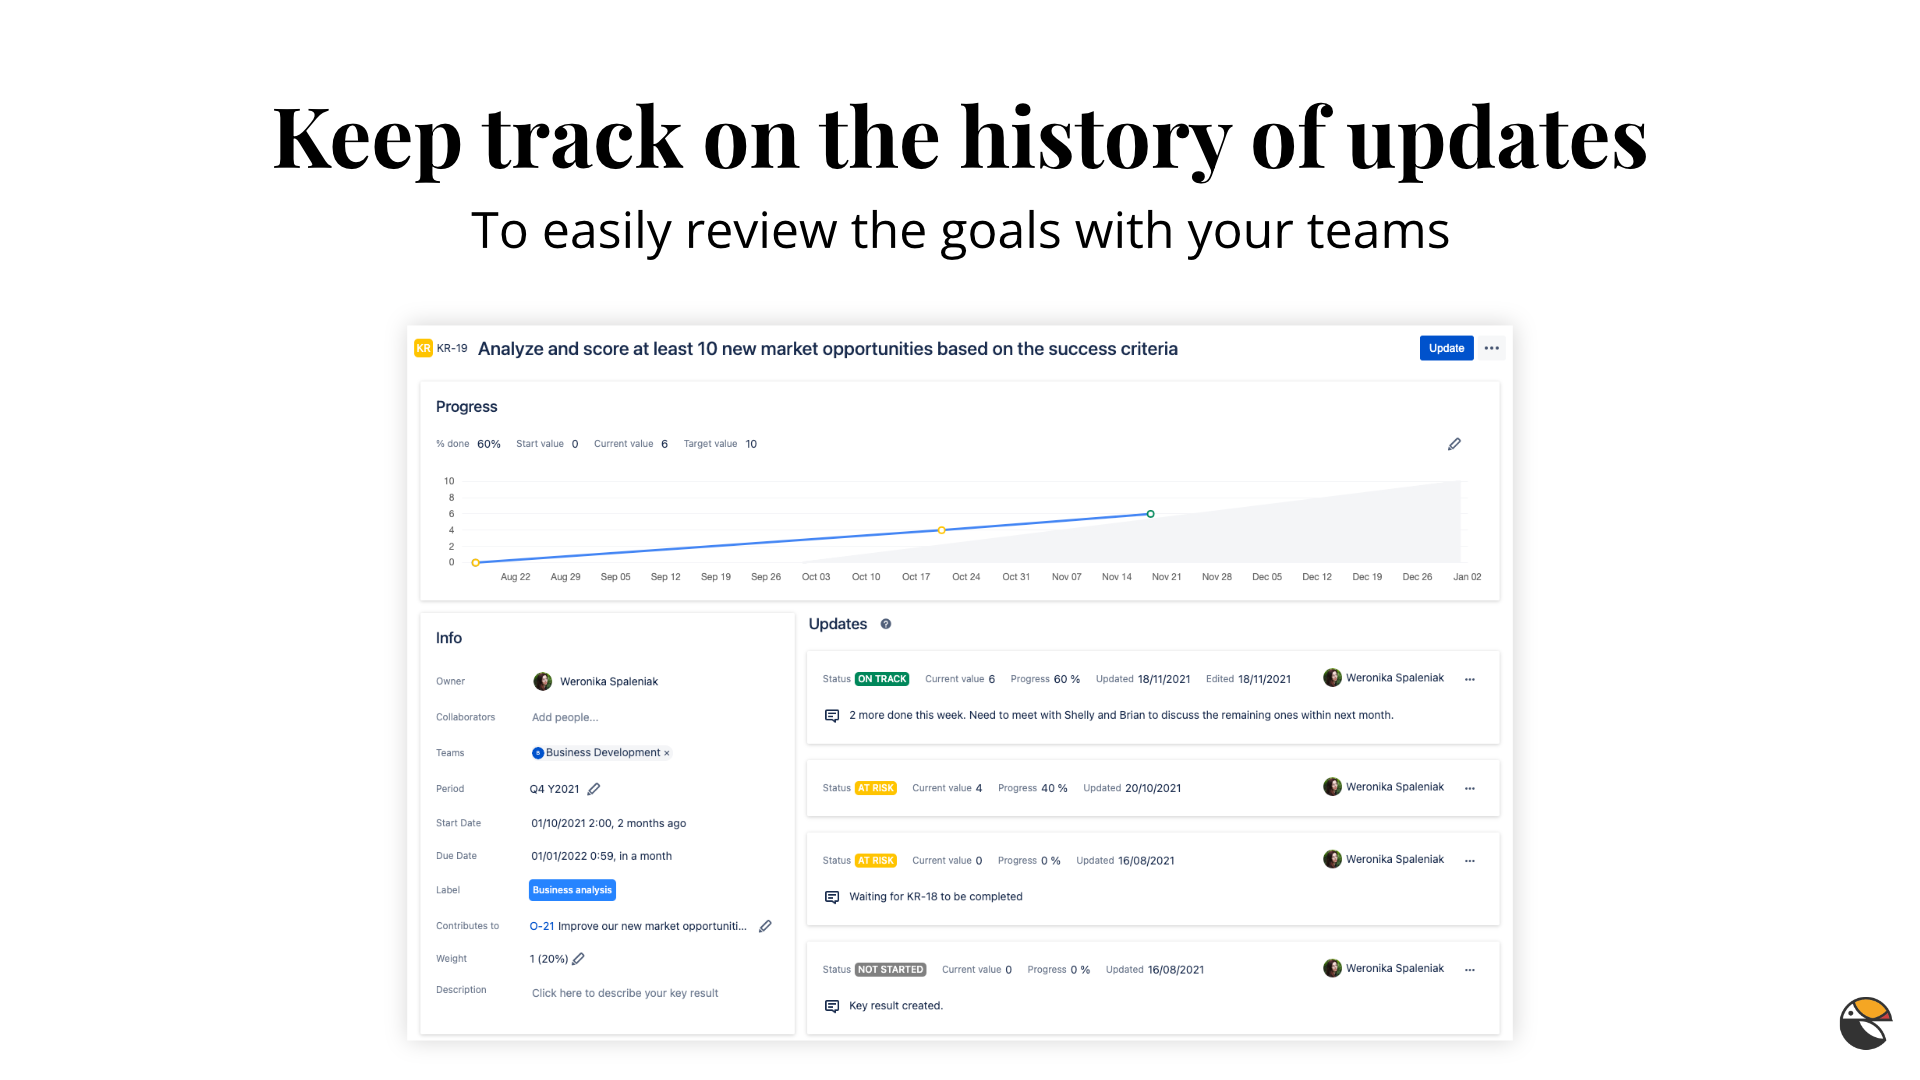 View all of the past updates and a progress against a trend line in order to estimate the status of each OKR.